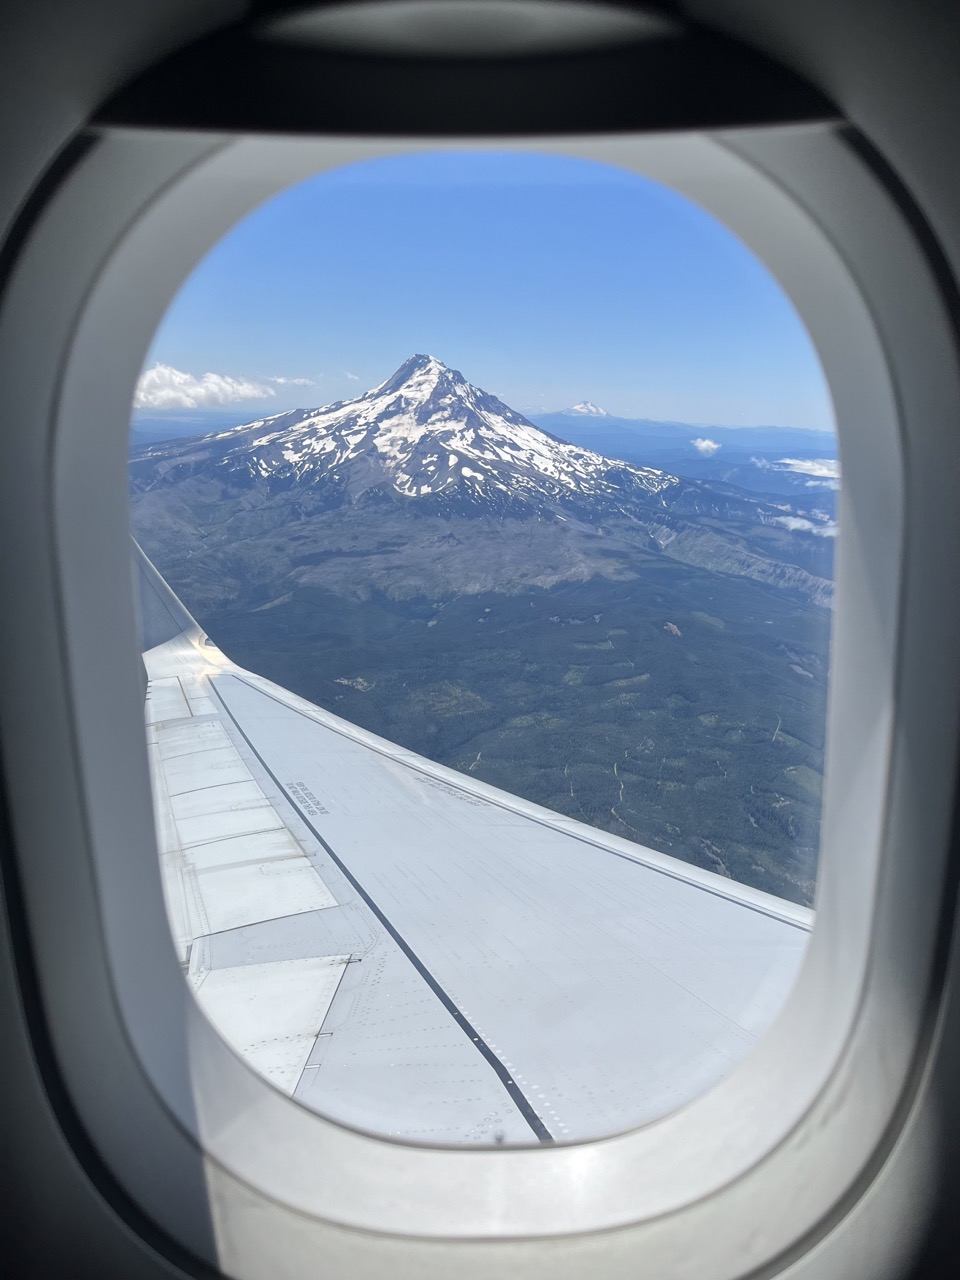 Mount Hood, as seen from my plane.